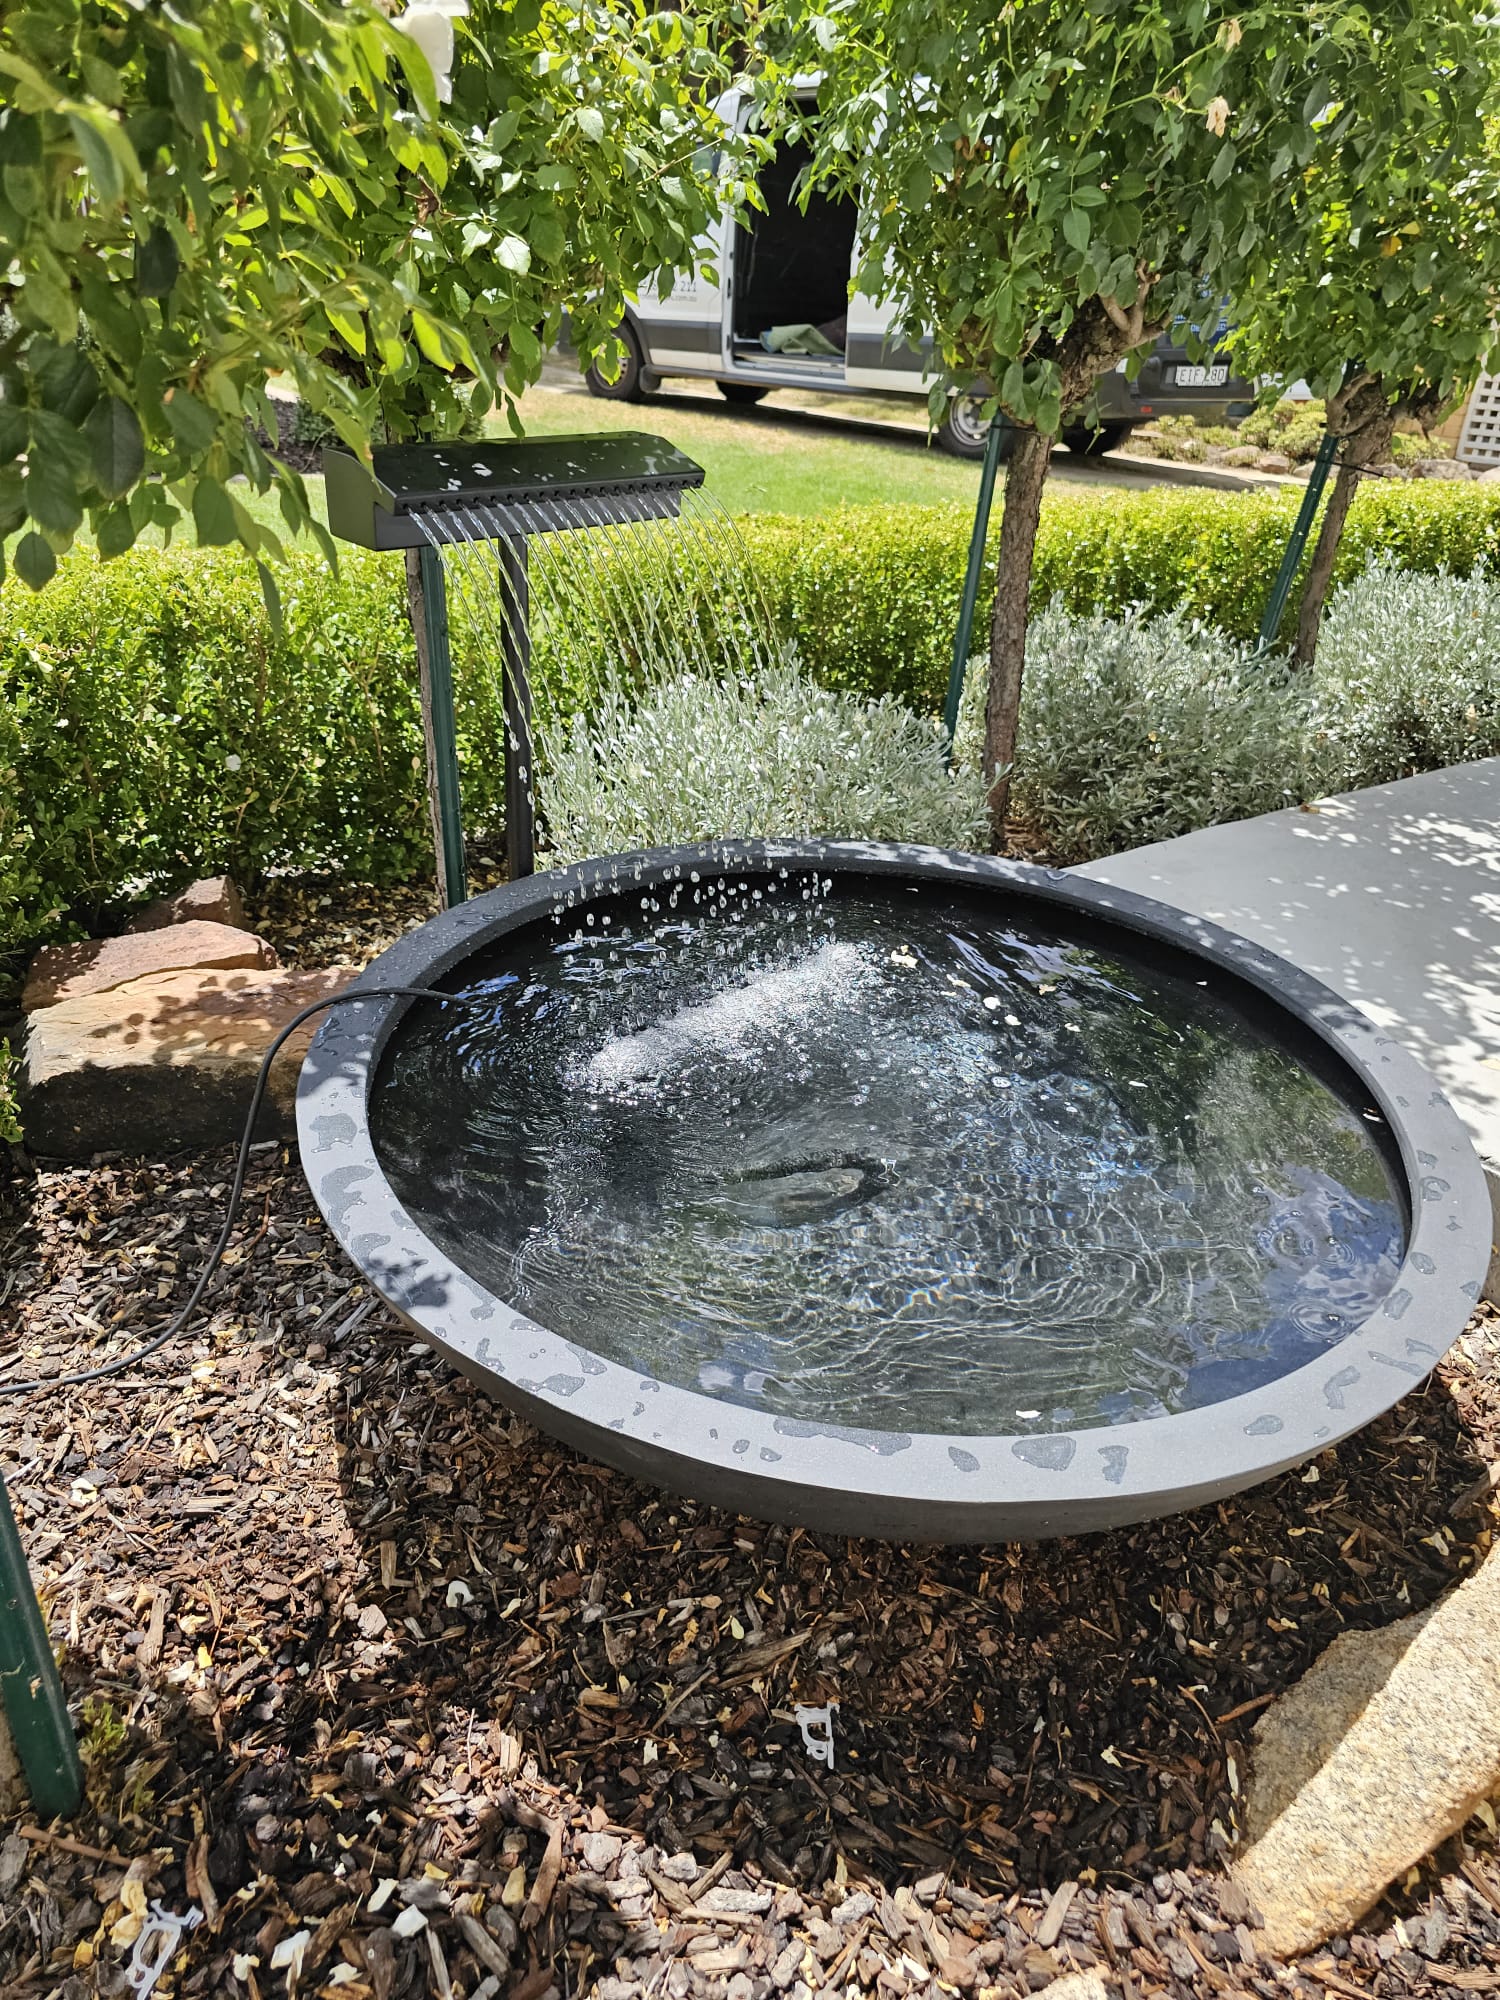 Kai "RAIN DROP" Water Feature with Urban Bowl Water Feature Large 